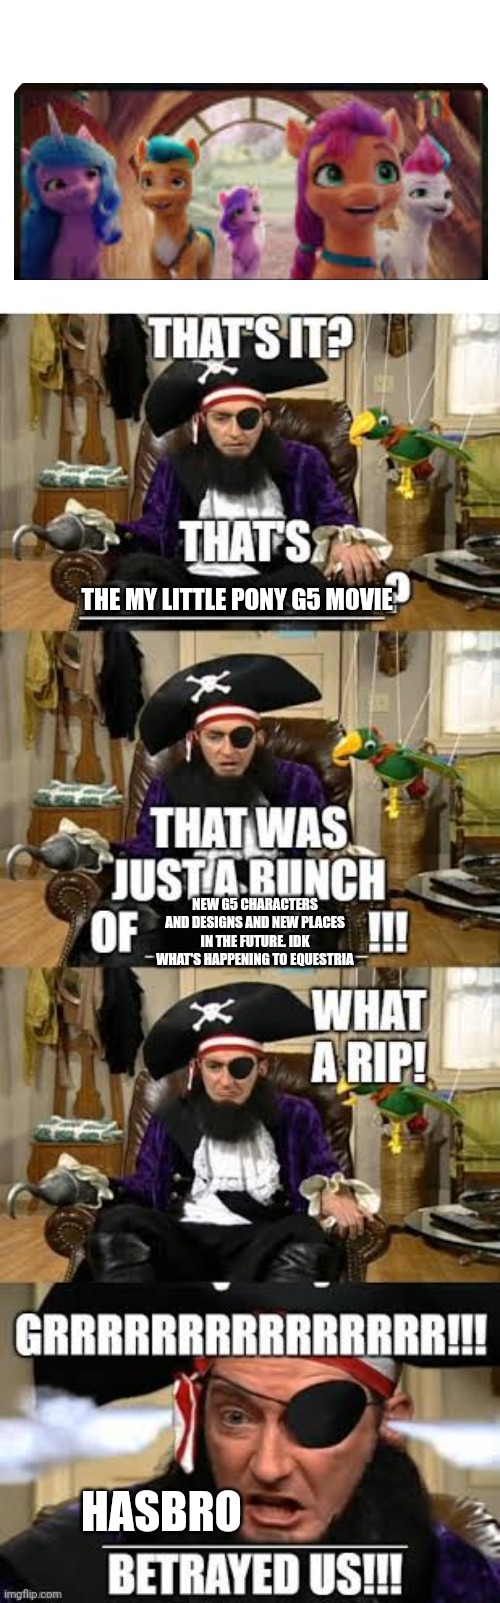 Patchy the pirate hates The My Little Pony New Generation Movie | THE MY LITTLE PONY G5 MOVIE; NEW G5 CHARACTERS AND DESIGNS AND NEW PLACES IN THE FUTURE. IDK WHAT'S HAPPENING TO EQUESTRIA; HASBRO | image tagged in my little pony | made w/ Imgflip meme maker